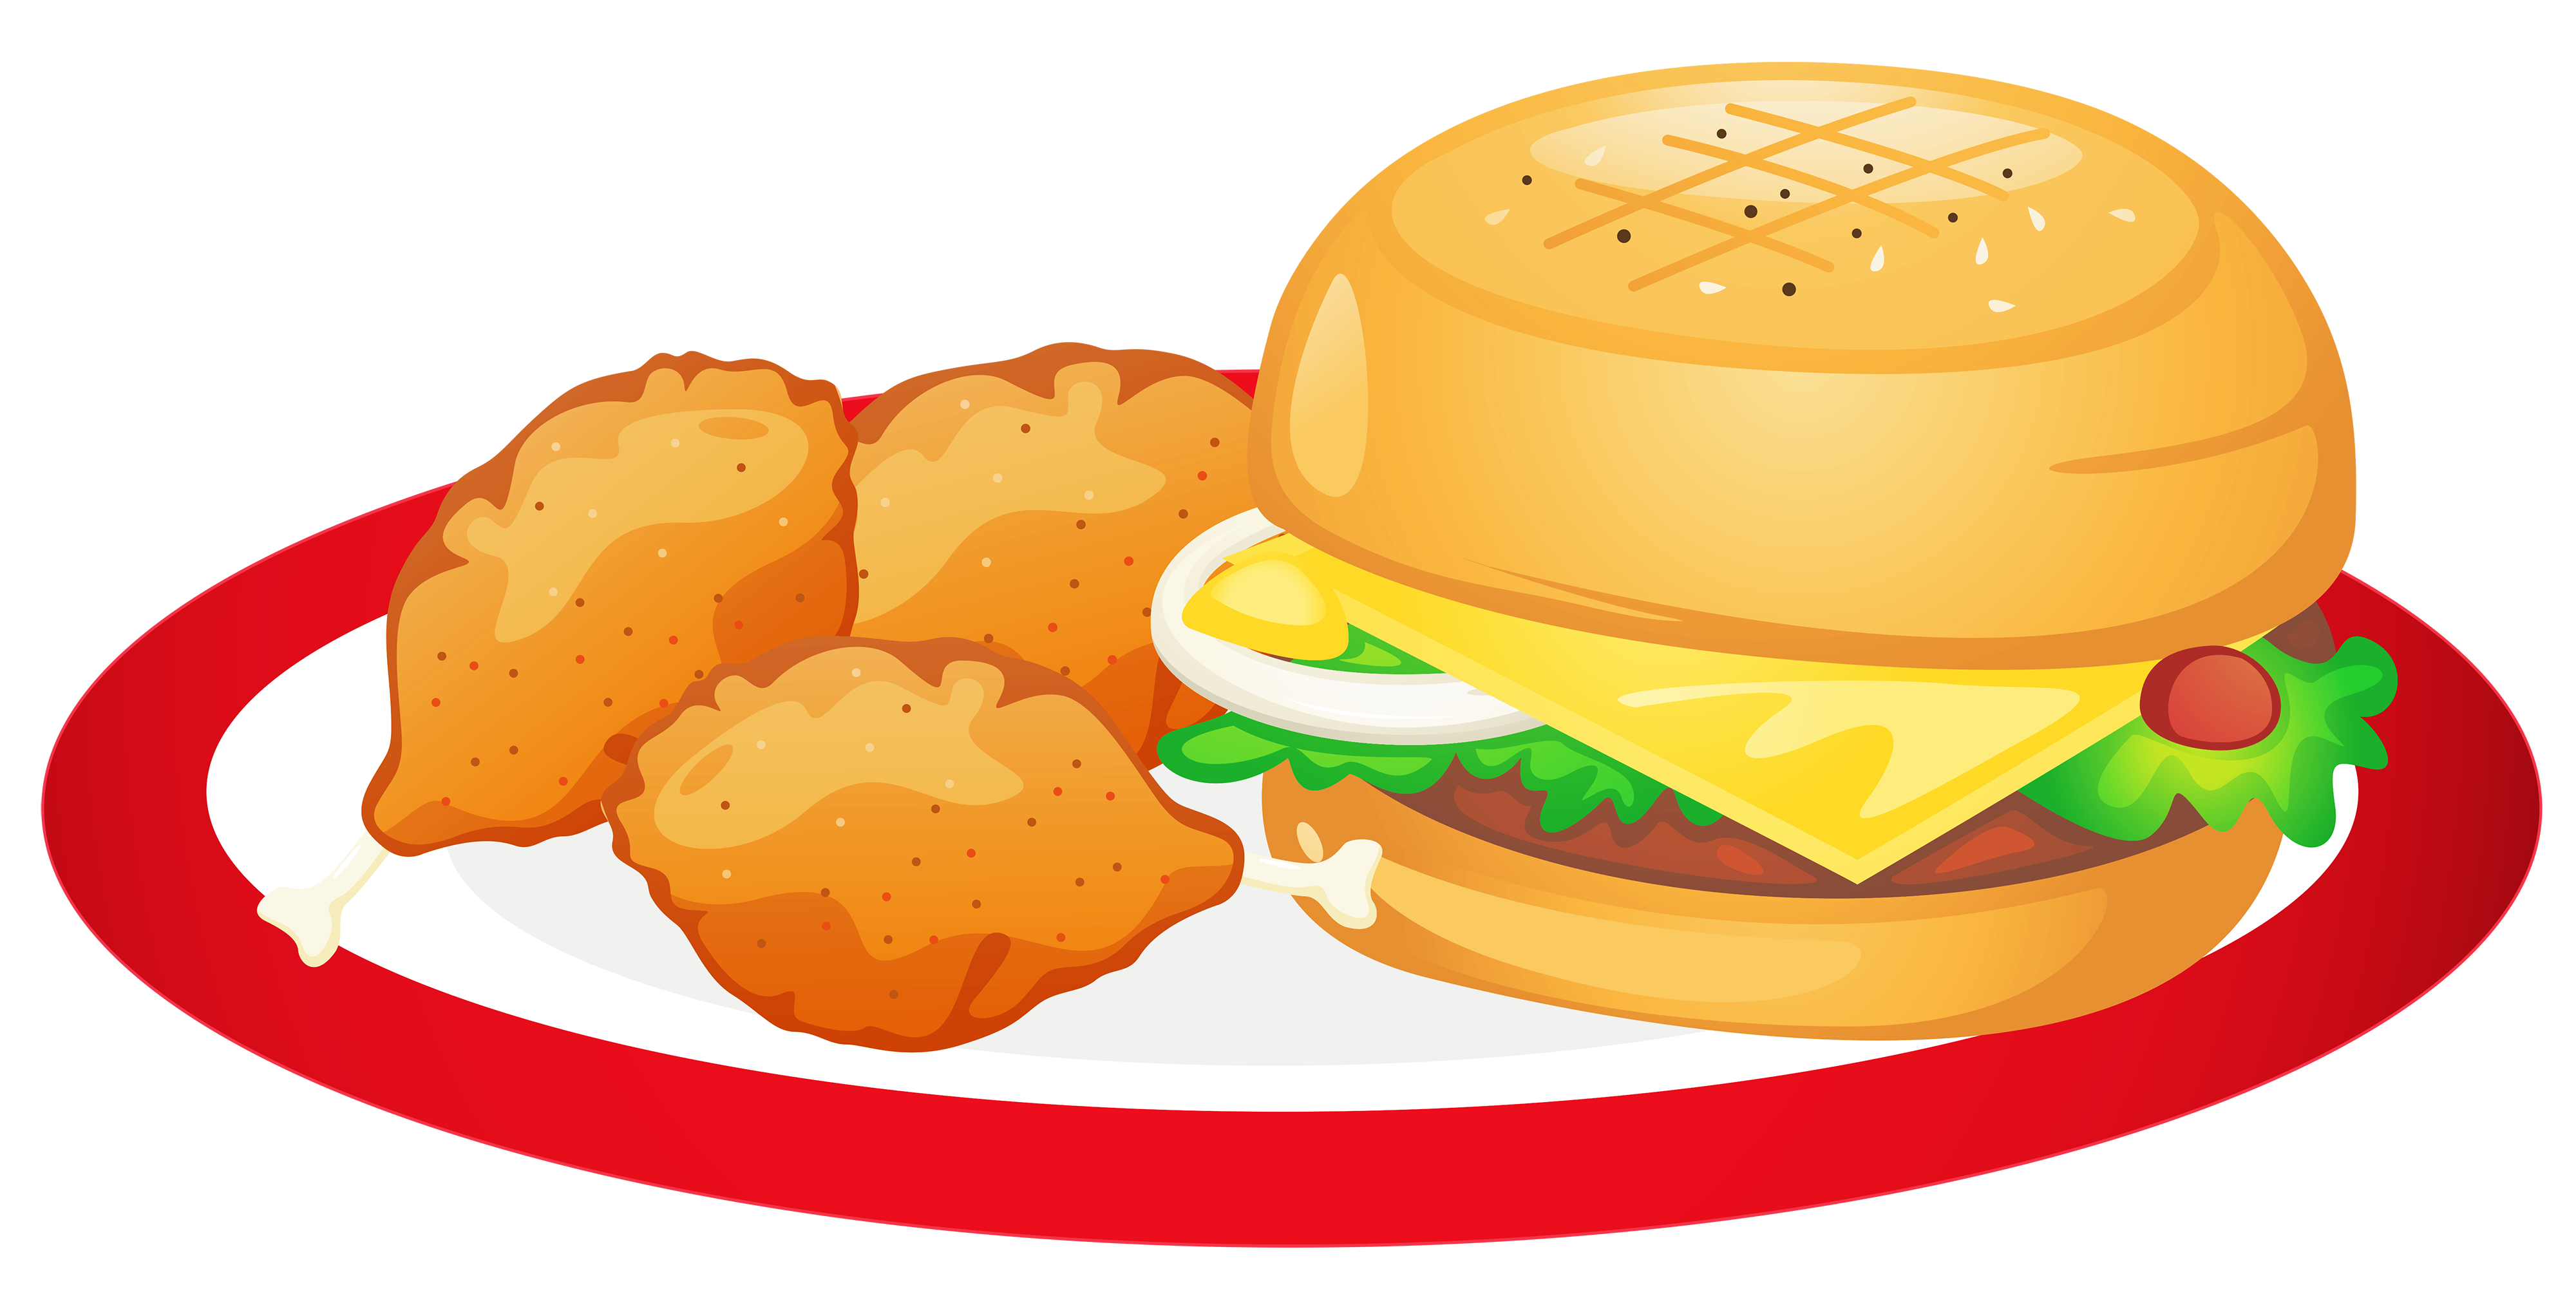 Free Food Platter Cliparts, Download Free Clip Art, Free.